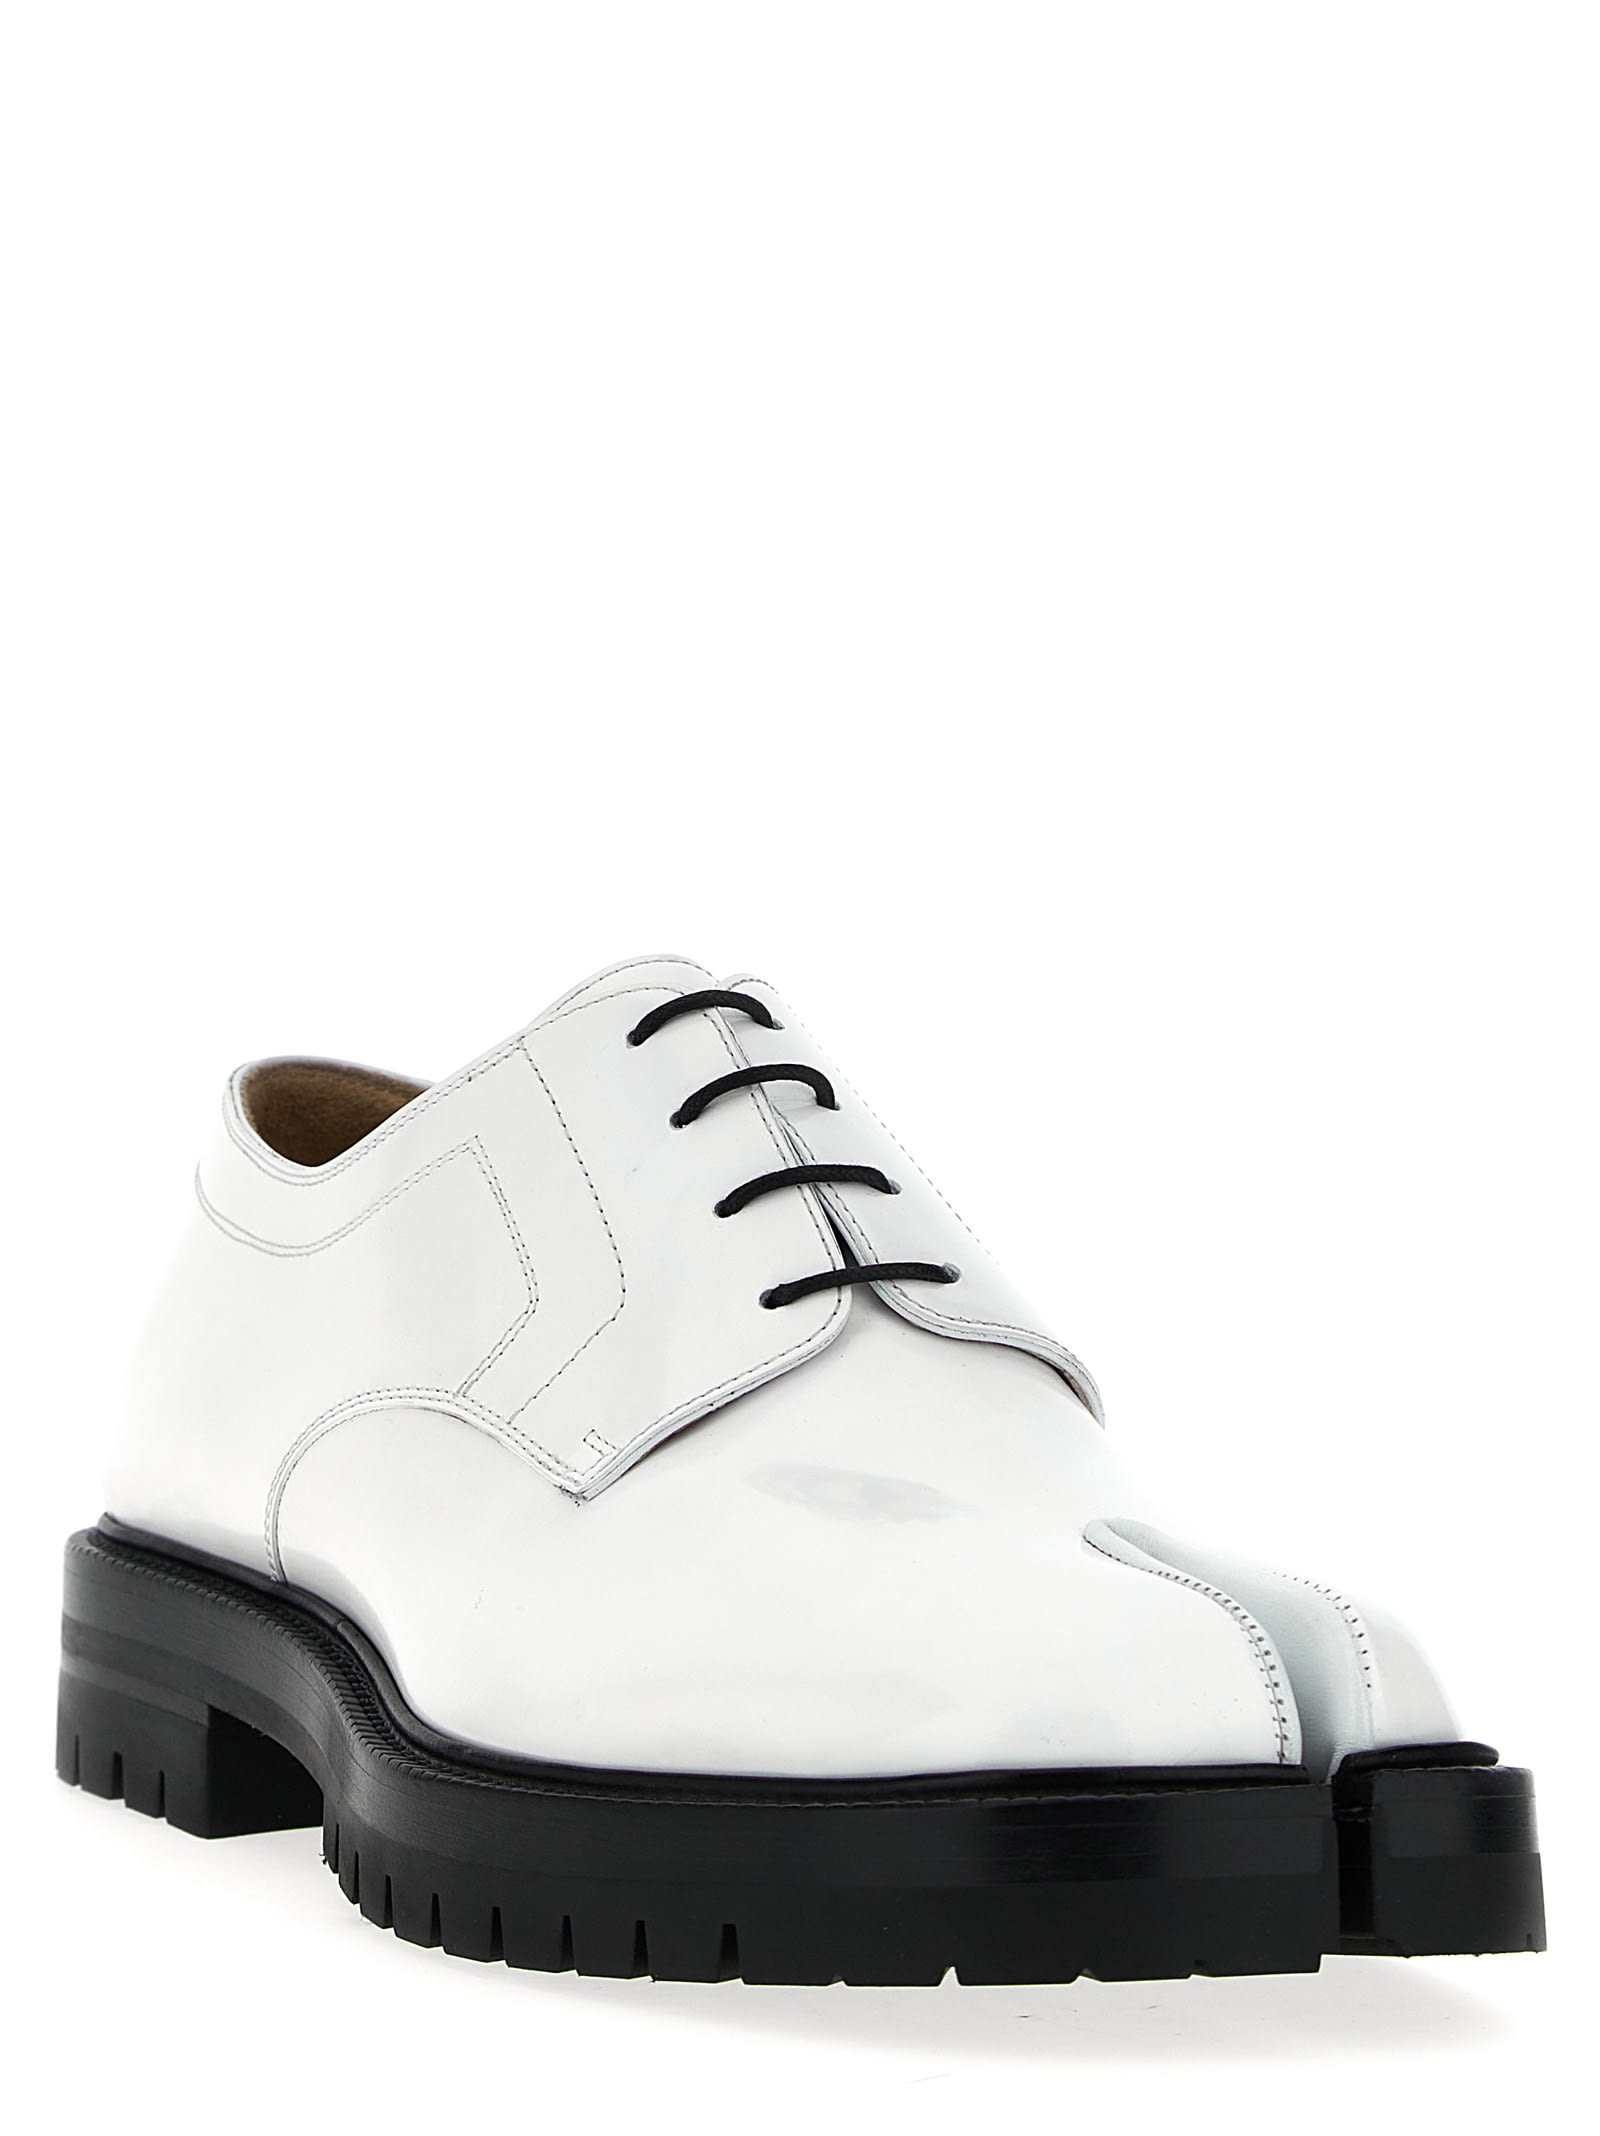 Shop Maison Margiela Taby Country Lace Up Shoes In White/black